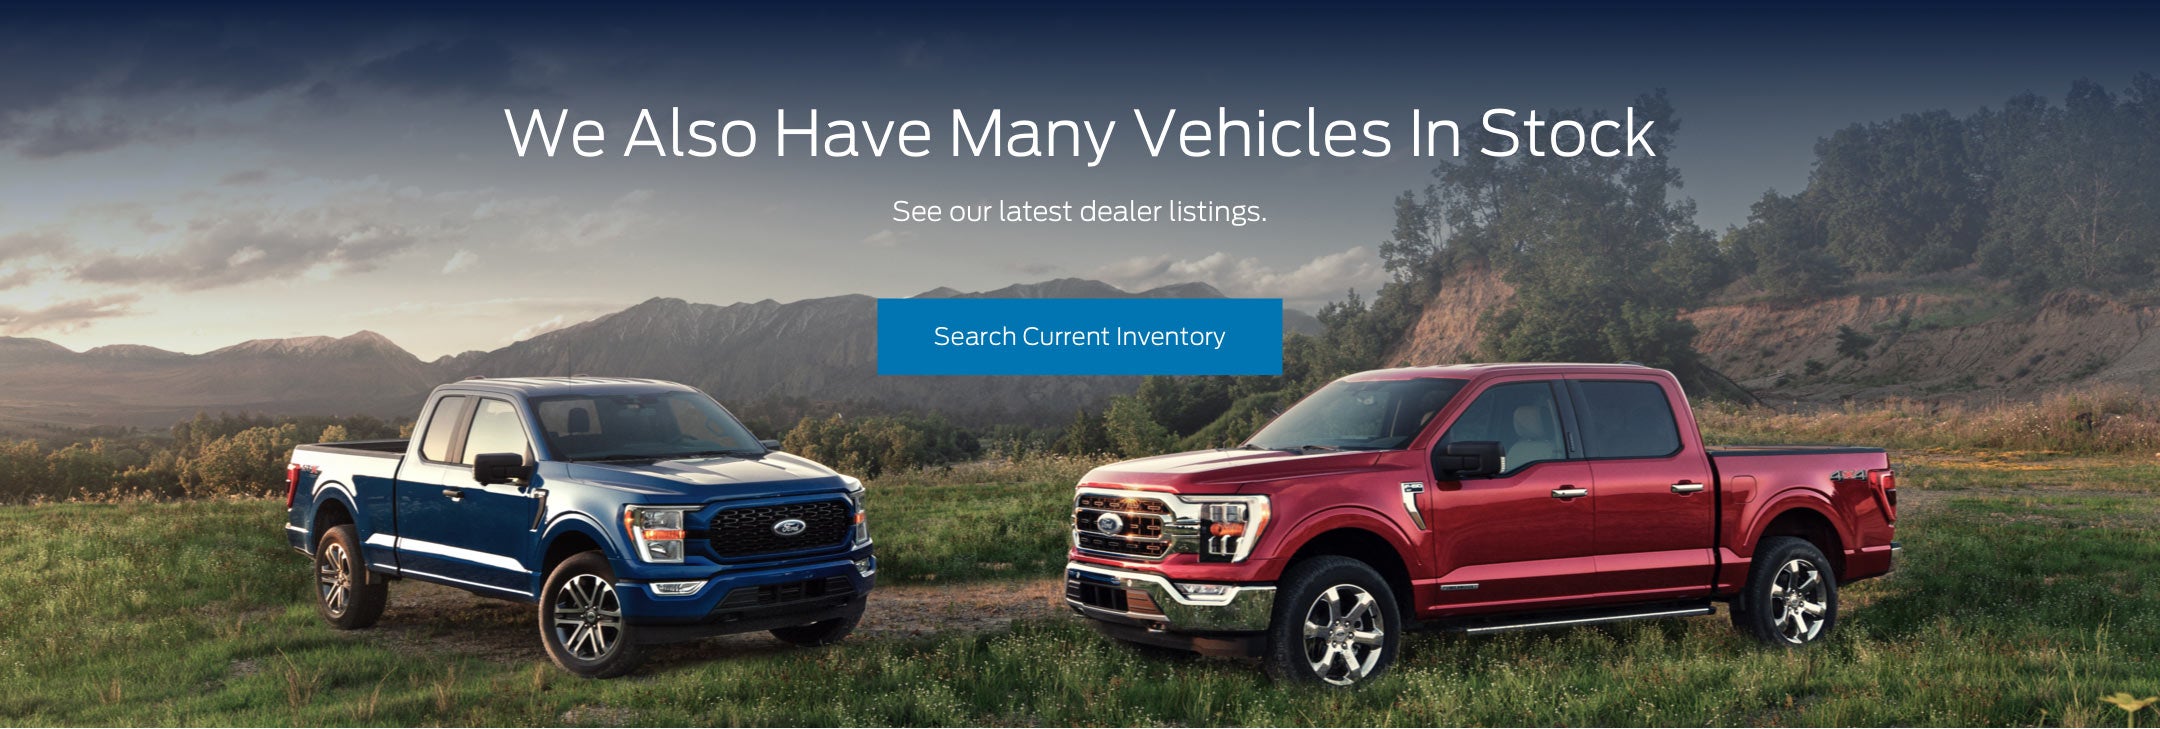 Ford vehicles in stock | Wood Ford Carthage in Carthage MO